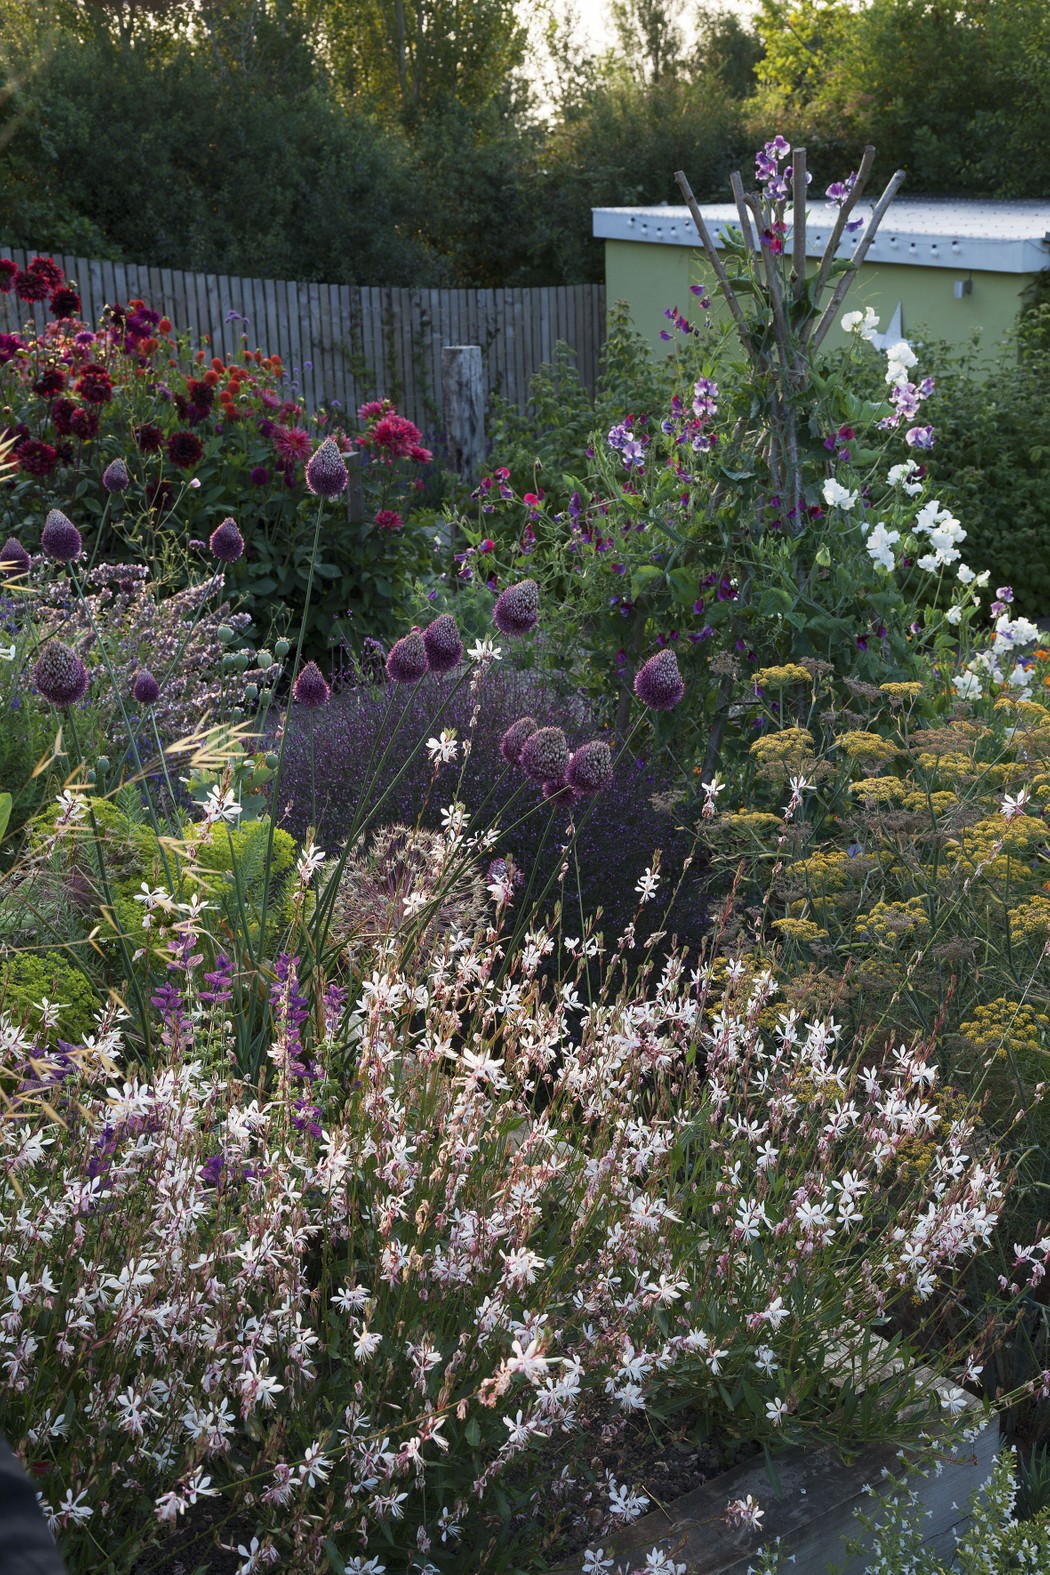 Airy flowers on wiry stems thrive in Tara’s coastal garden; the spherical, purple heads of Allium sphaerocephalon float above white-flowered Oenothera lindheimeri and clary sage accompanied by bronze fennel.